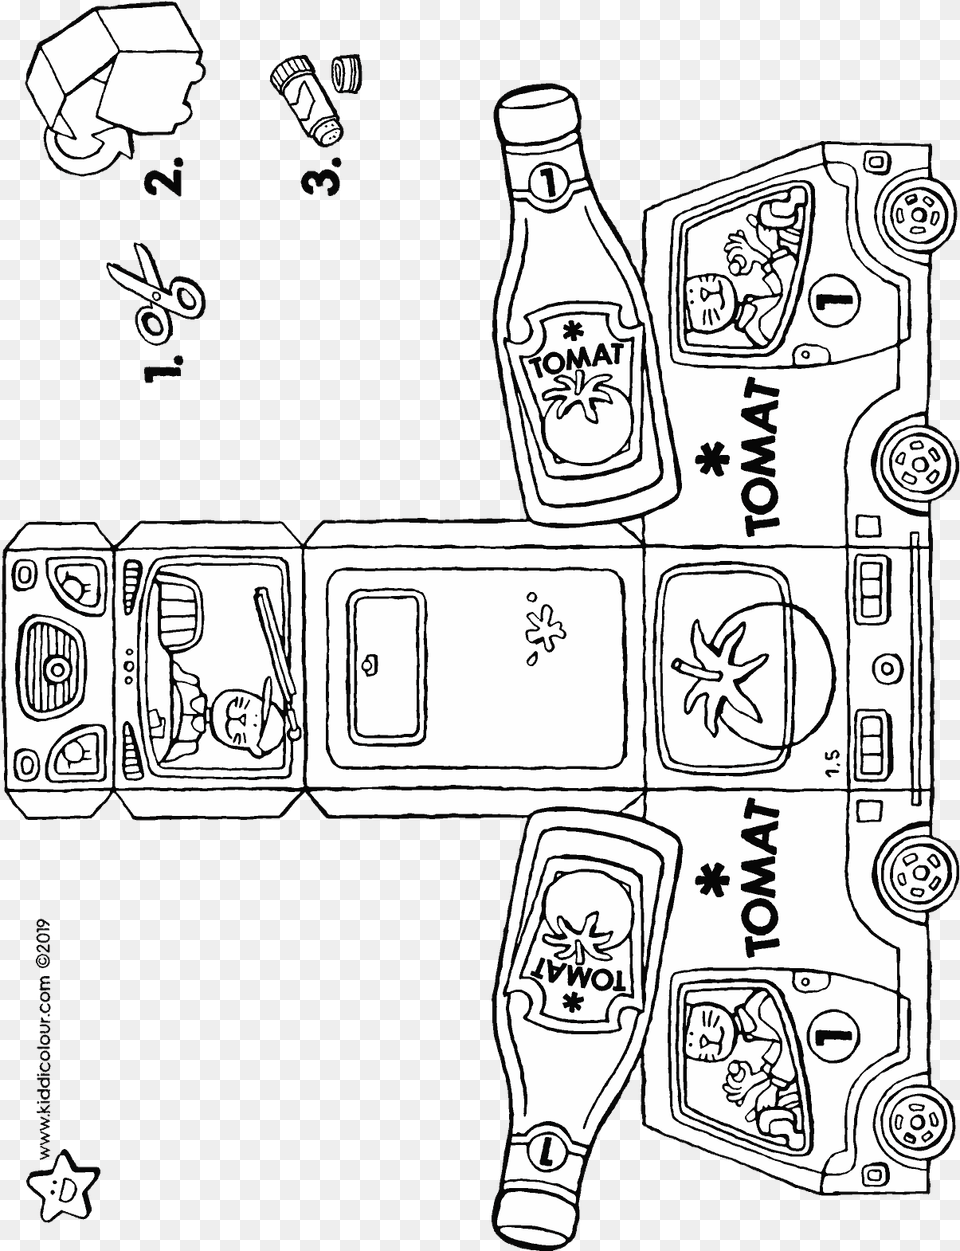 Make Your Own Delivery Van With Ketchup Bottle Colouring Line Art, Book, Comics, Publication, Alcohol Free Png